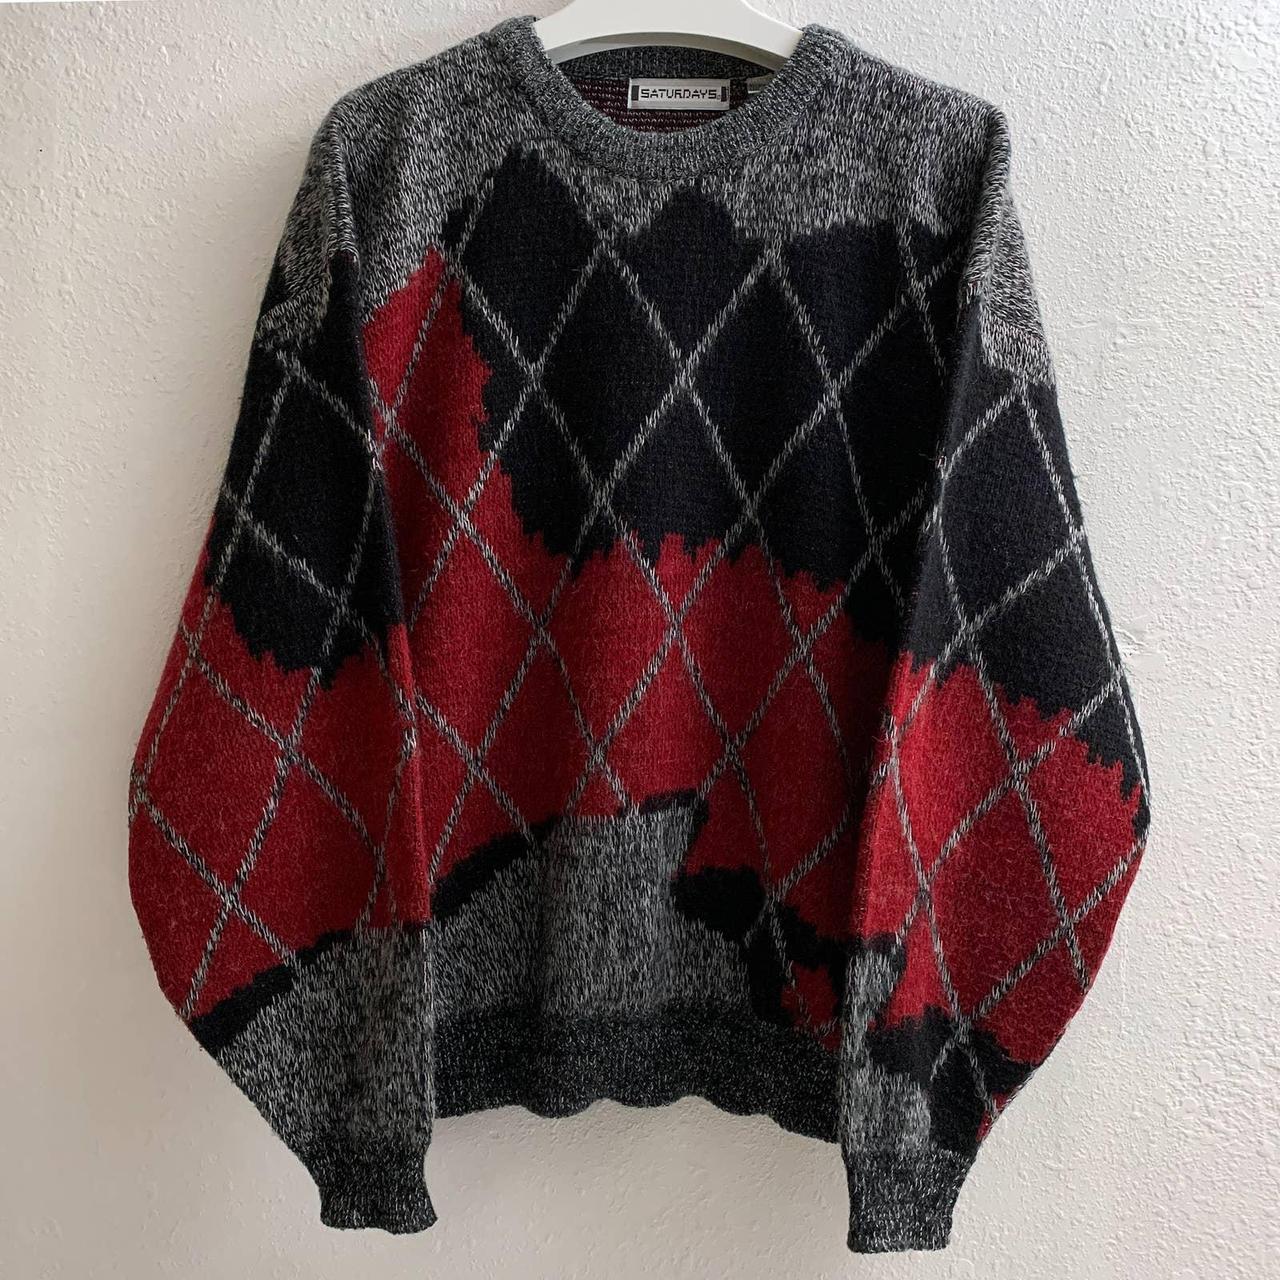 1980s WOOL CHAIN-LINK SWEATER 9/10 condition.... - Depop